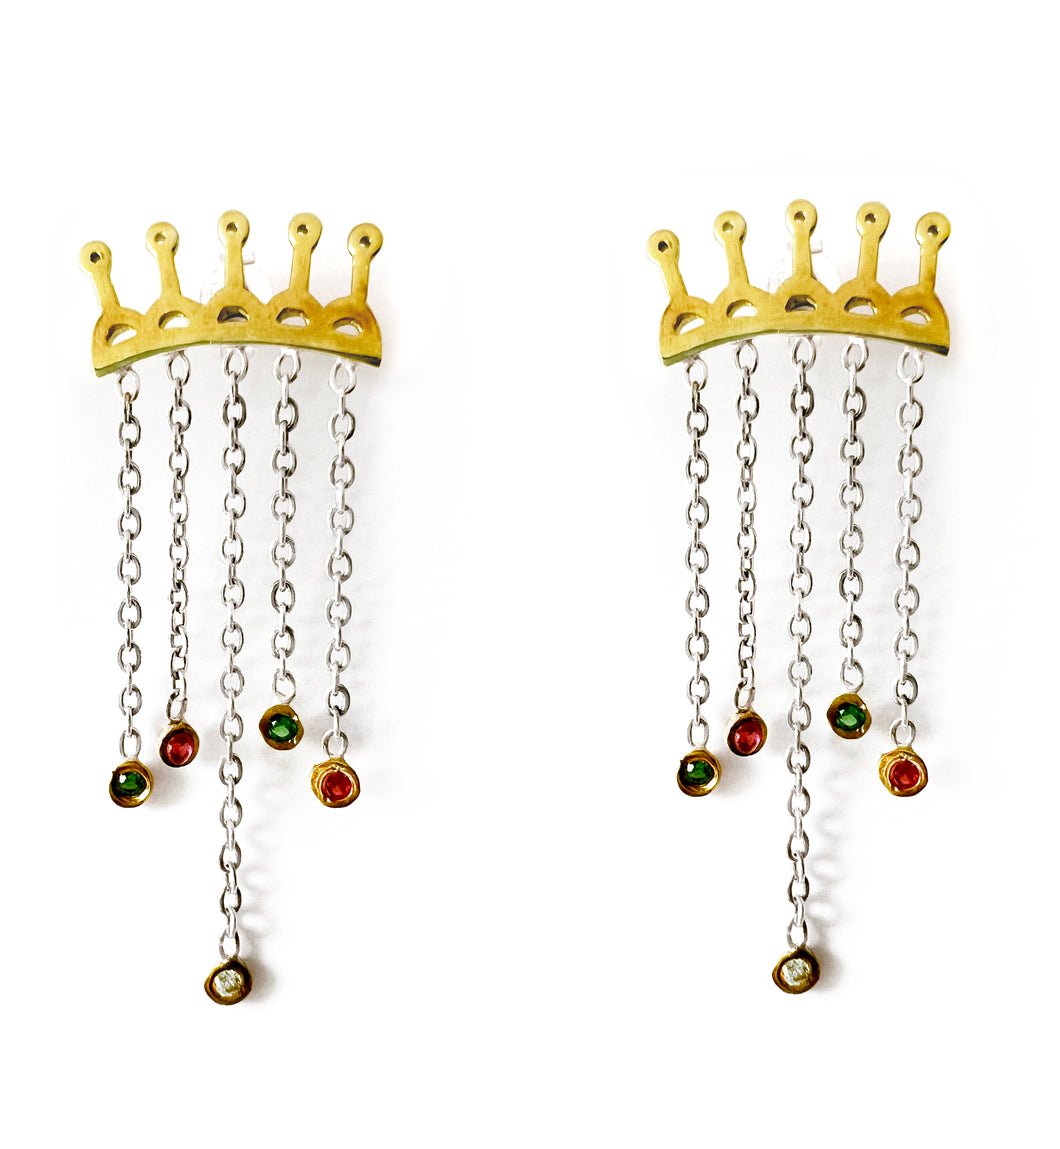 Silver and yellow gold plated crown earrings with stones